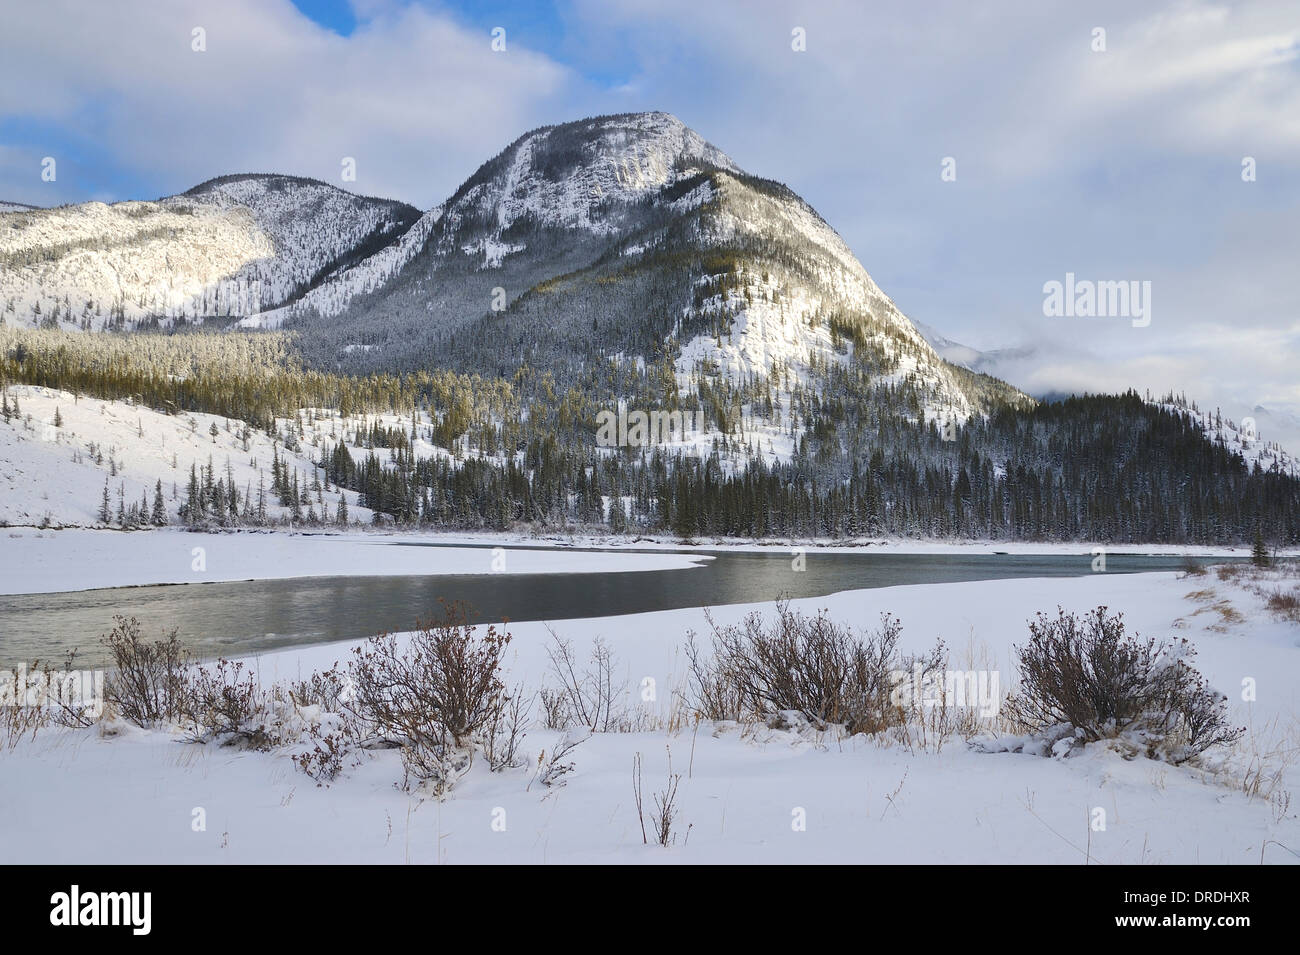 A  winter landscape image along the Athabasca River in Jasper National Park Alberta Canada. Stock Photo